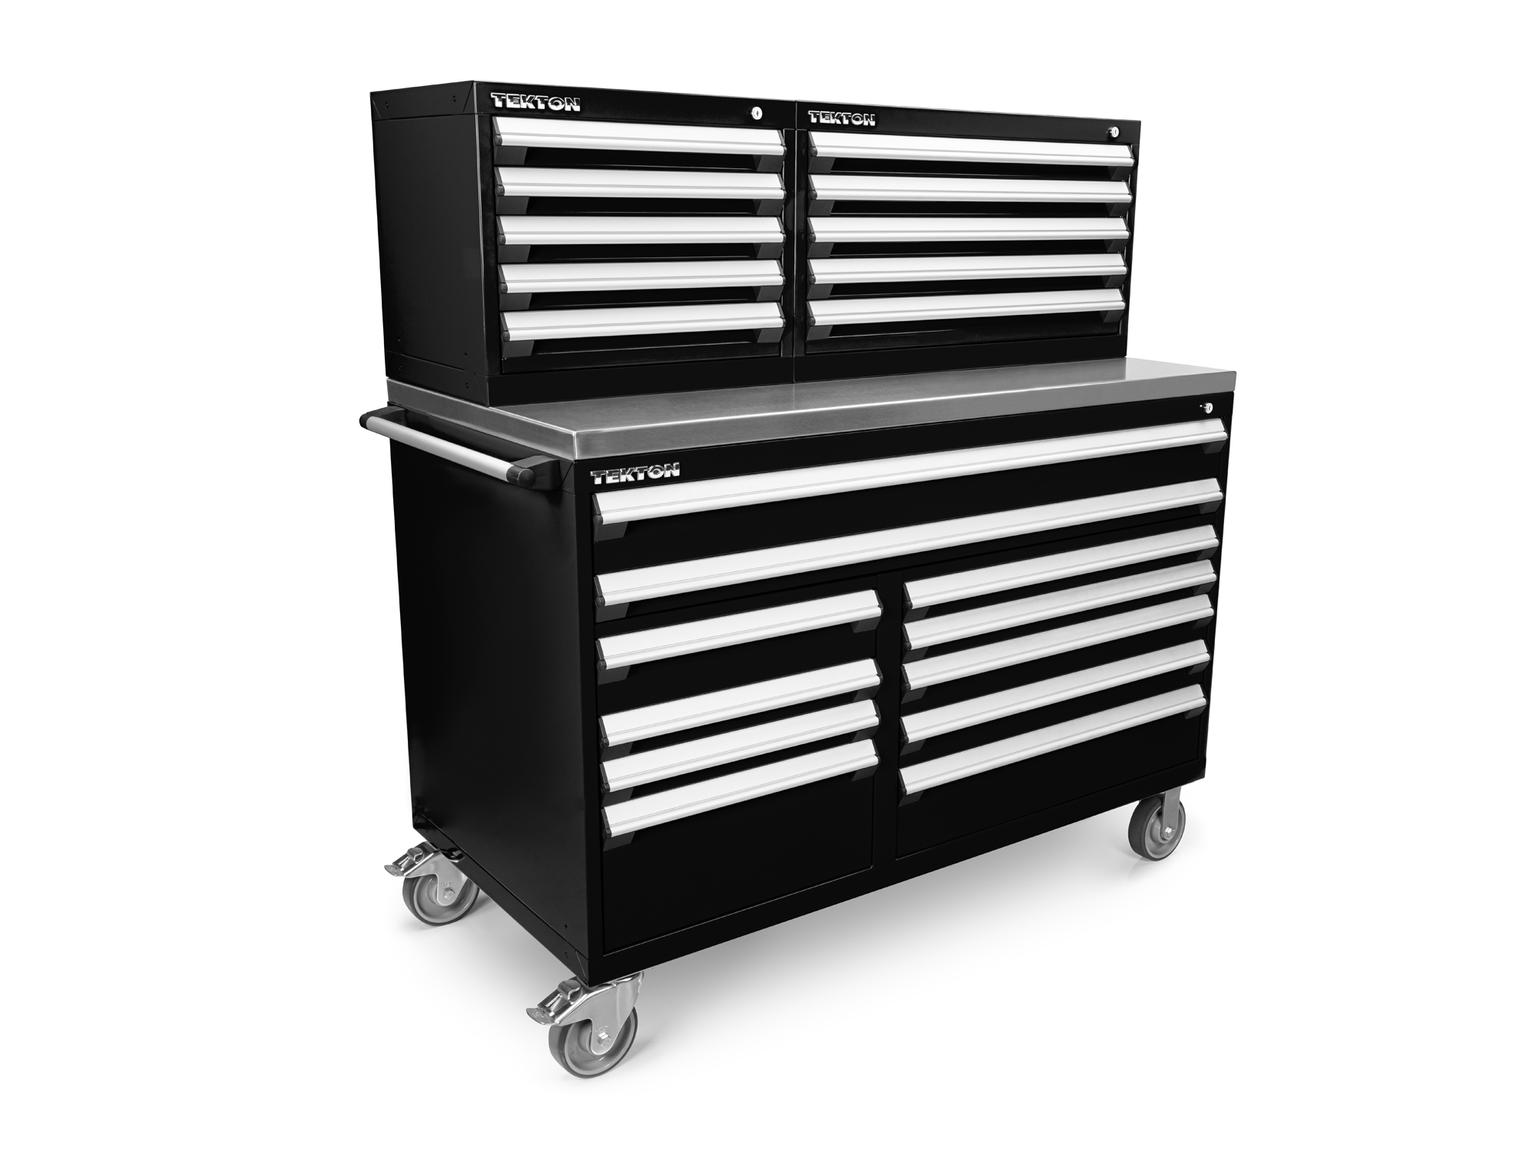 21-Drawer 40/60 Split Bank Tool Cabinet System with Stainless Steel Top, Black (60 W x 30 D x 63 H in.)